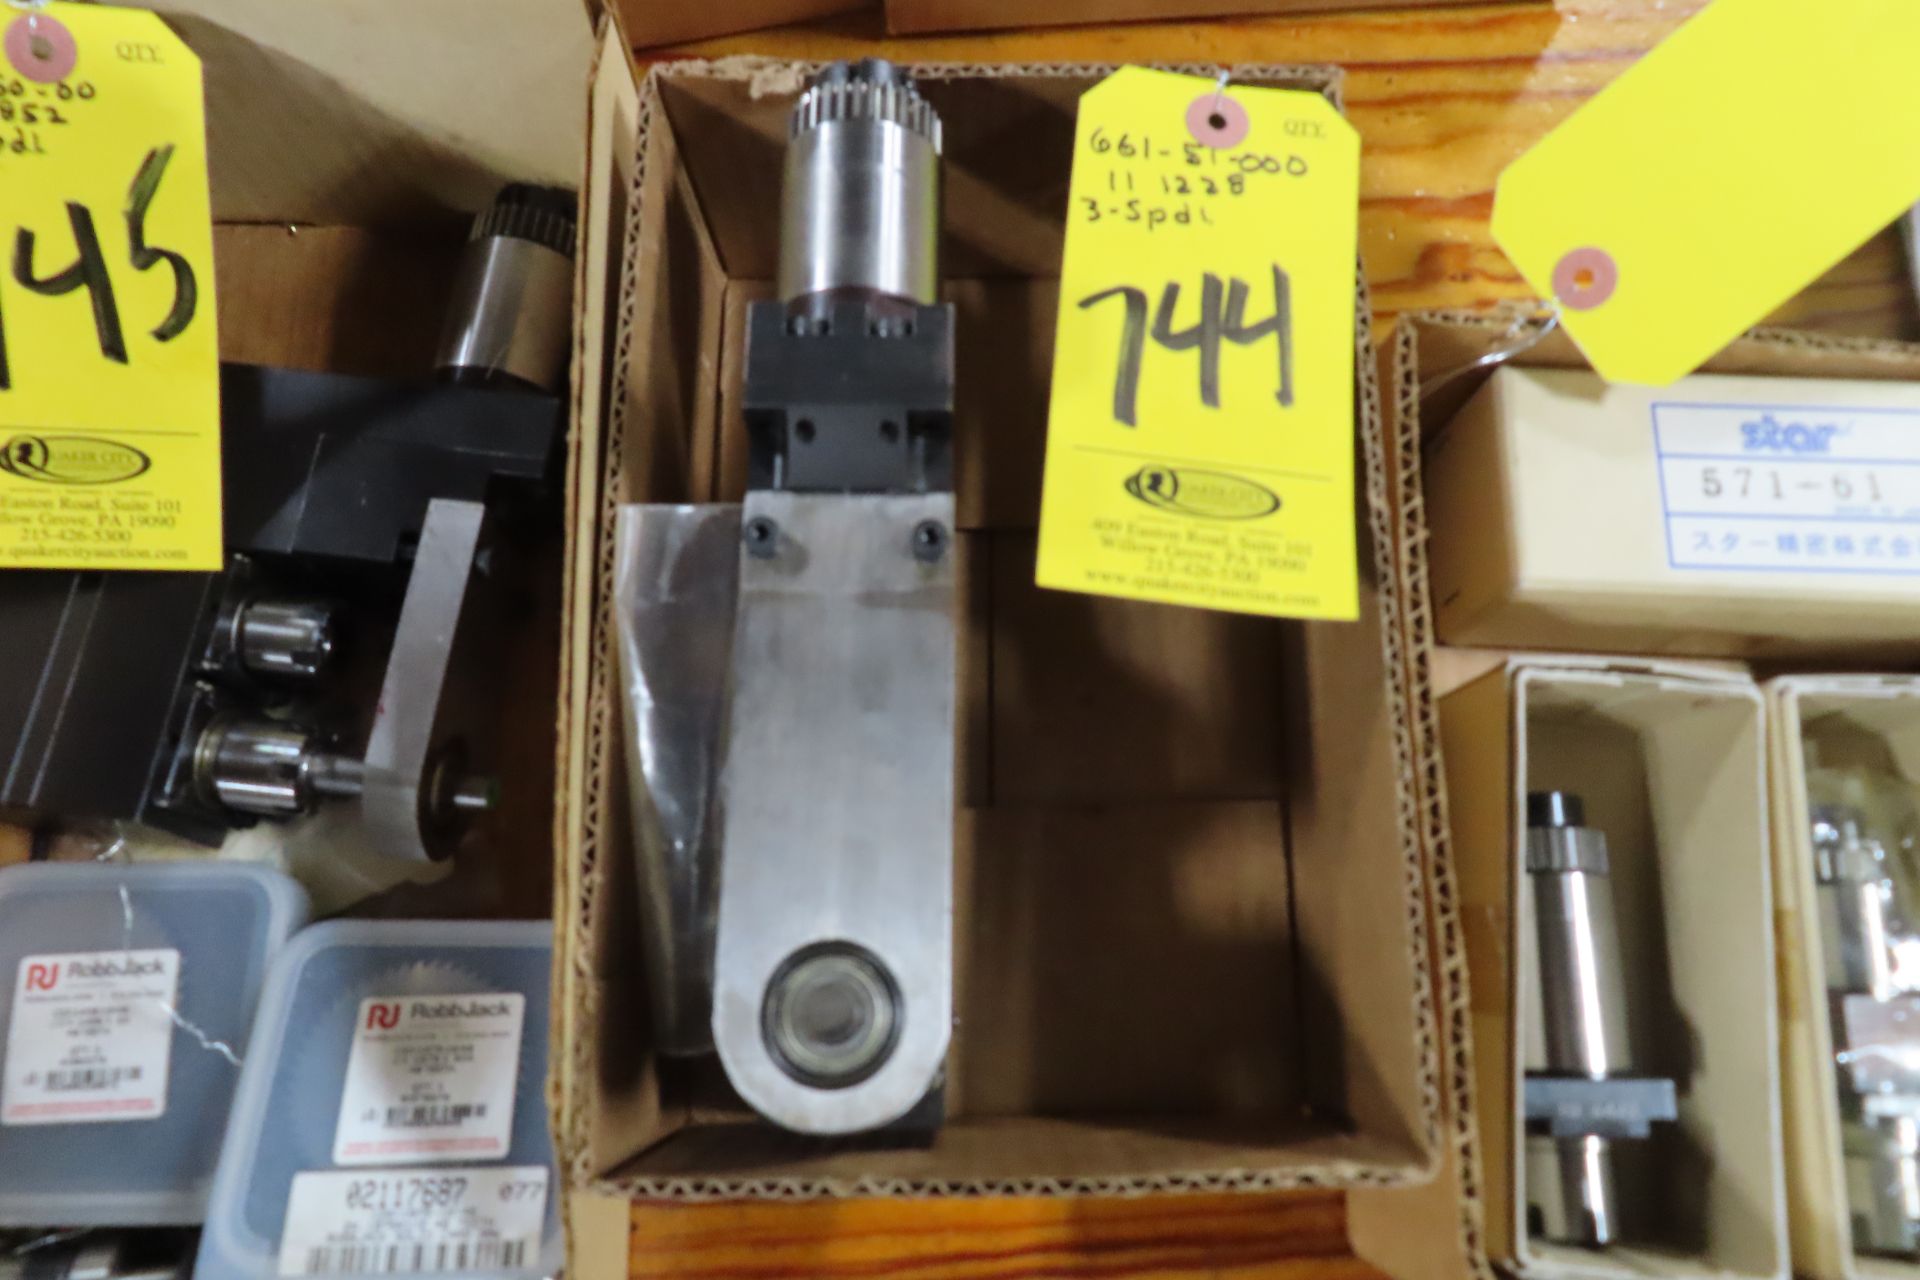 STAR 661-51-000, S/N 111228, 3 SPINDLE FRONT WORKING LIVE (DRILLING) TOOL - Image 6 of 6